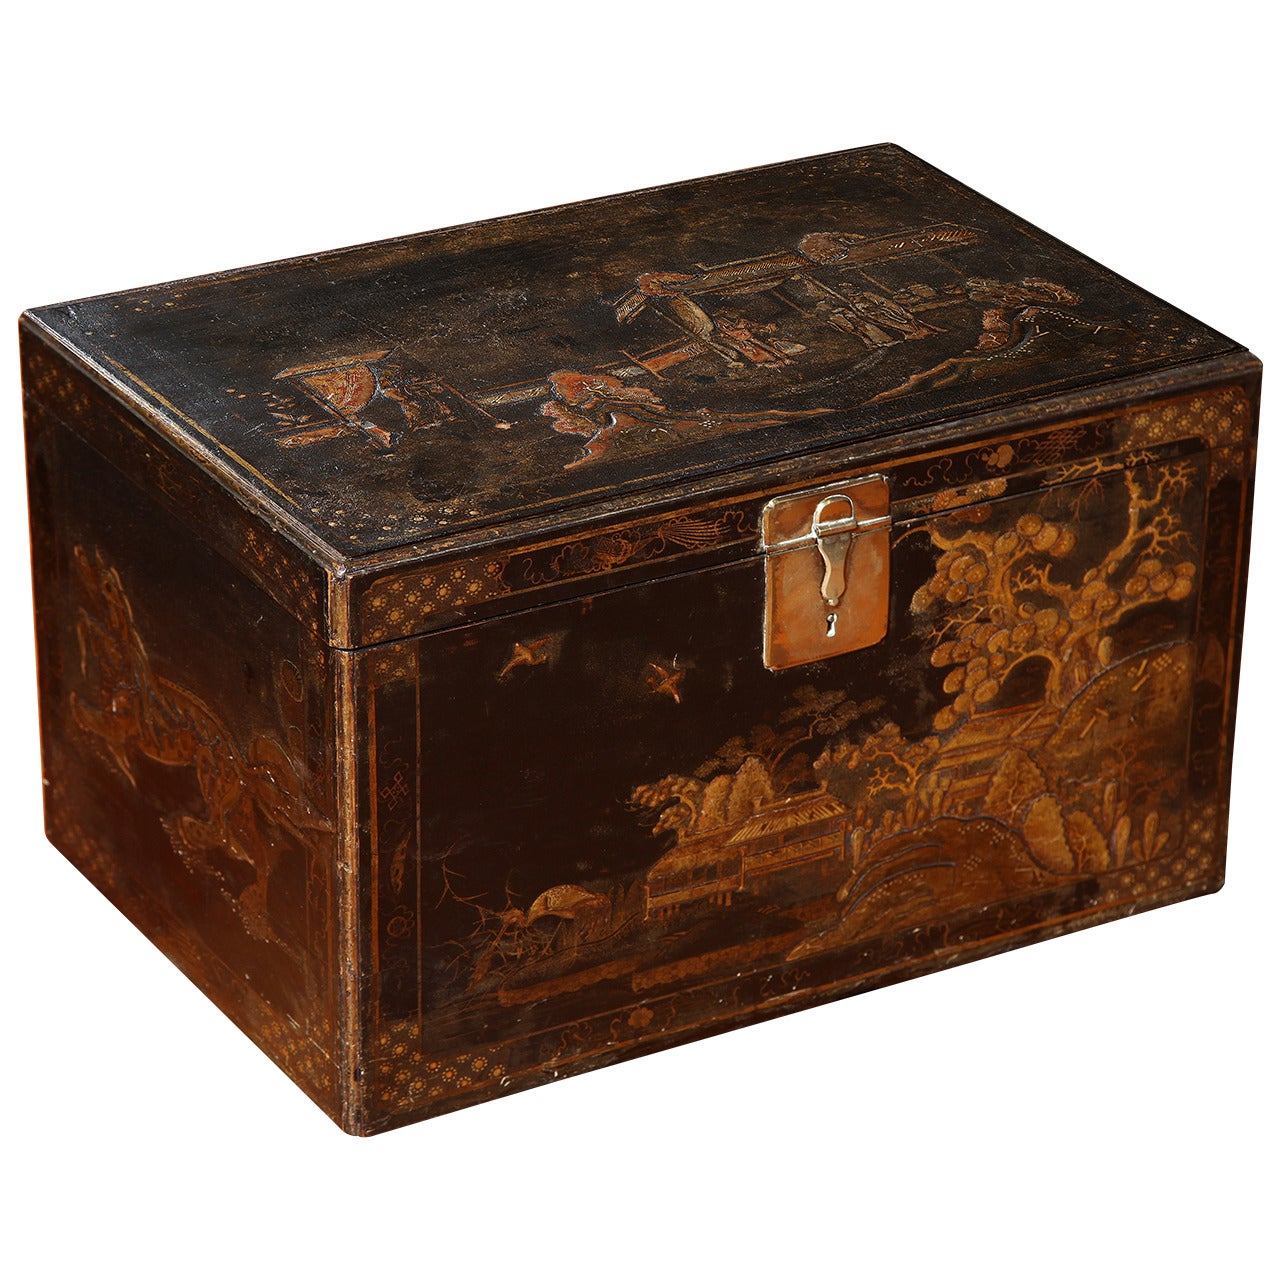 Queen Anne Japanned Chinoiserie Coffer with Hinged Lid English, circa 1705